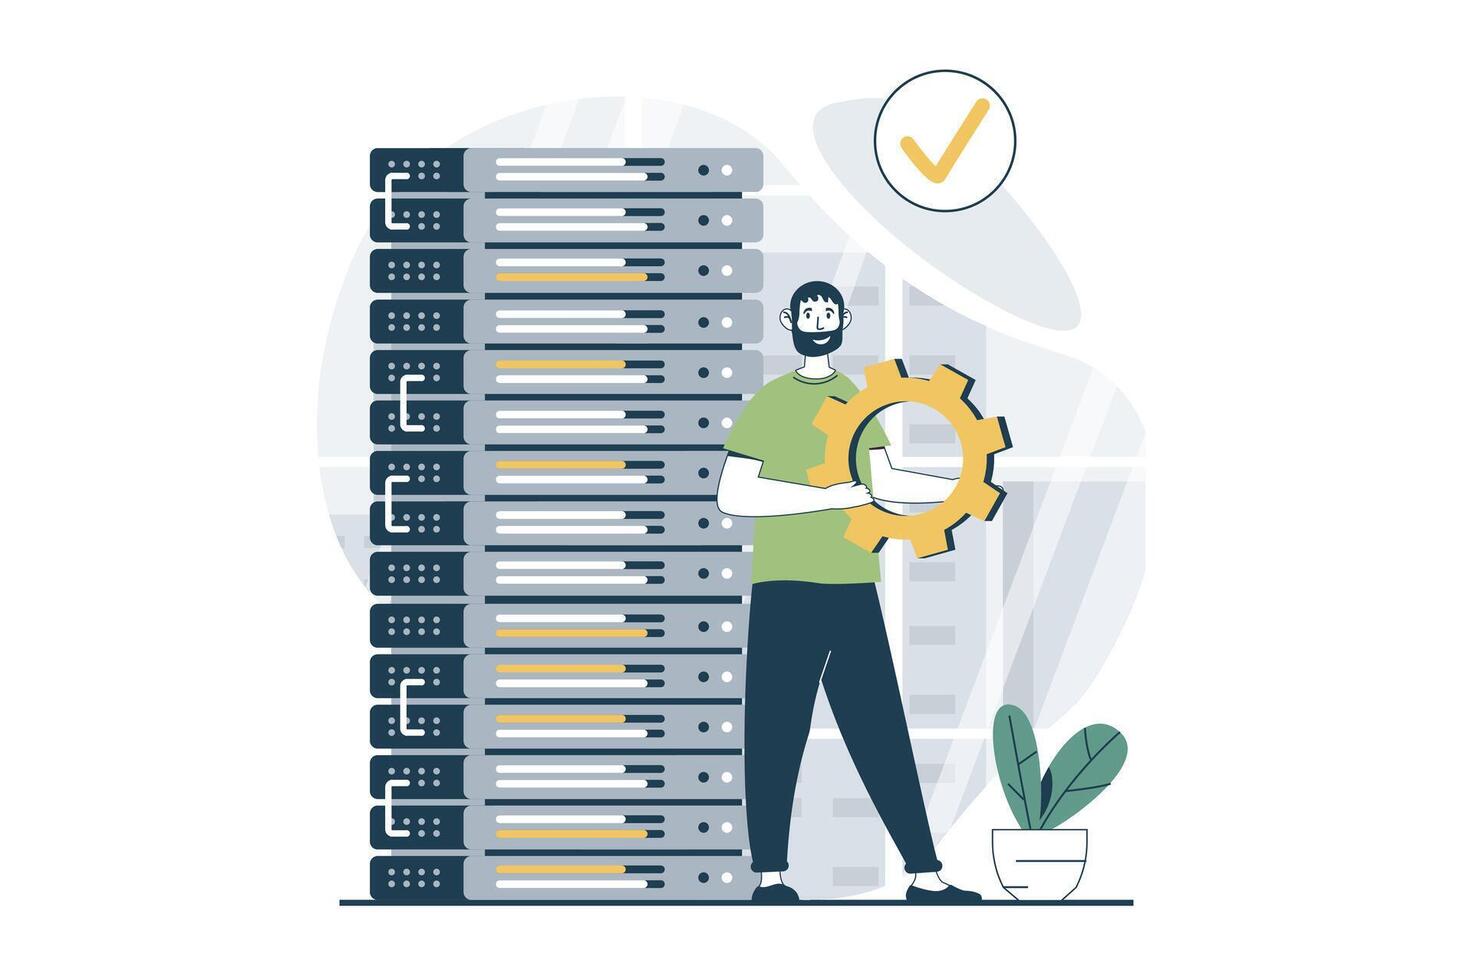 Server maintenance concept with people scene in flat design for web. Man works as tech administrator and fixing equipment in rack room. Vector illustration for social media banner, marketing material.